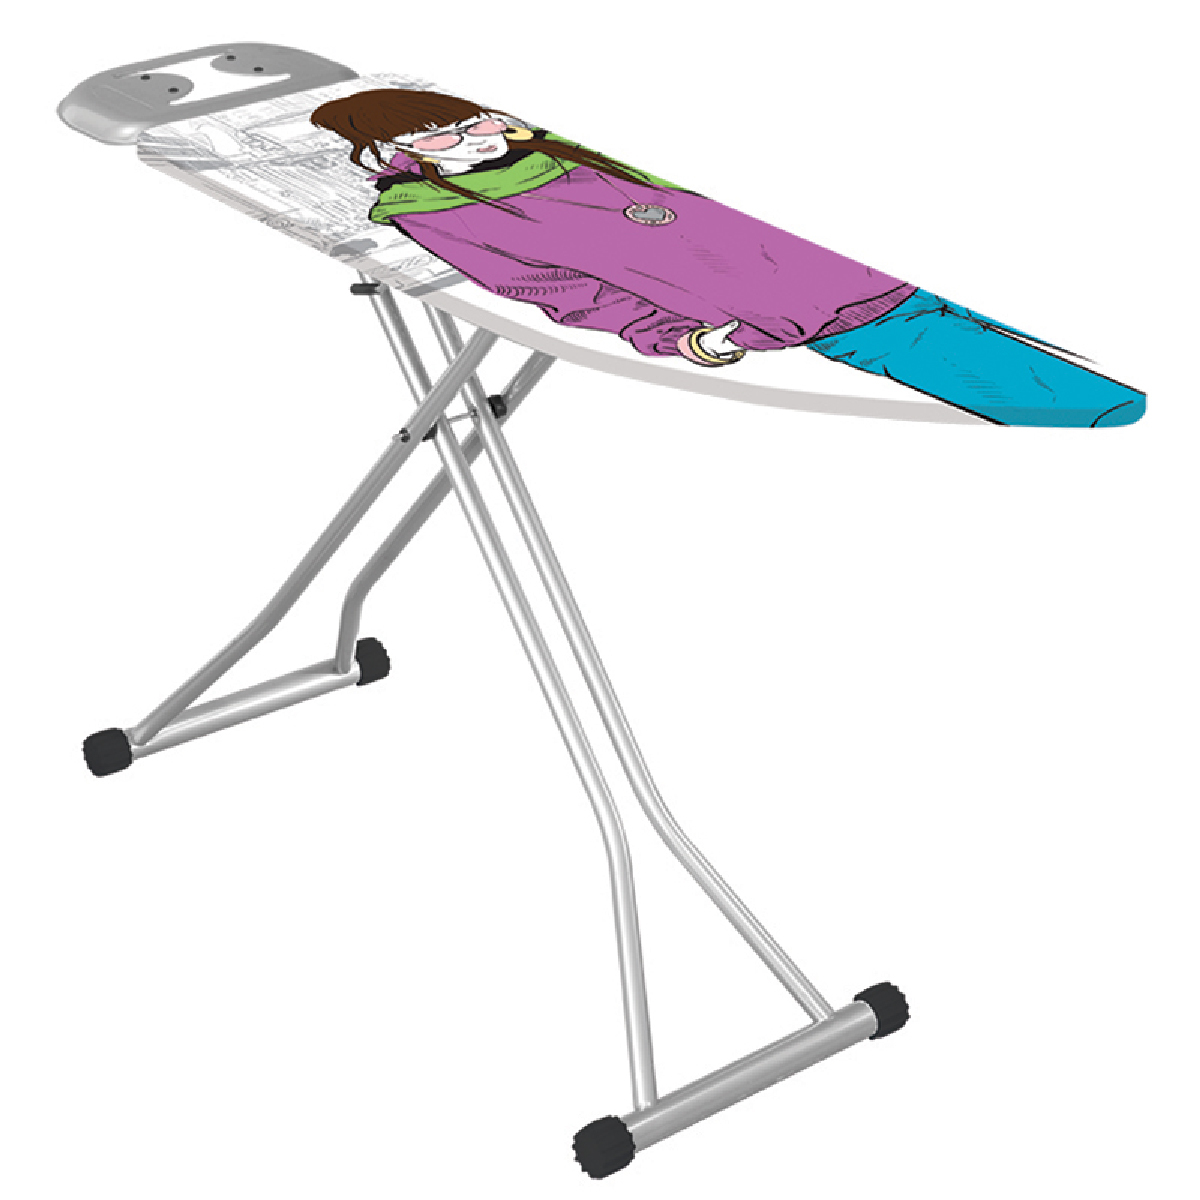 Magic Iron Board, Adjustable Height From 60 To 90Cm, Mesh Top Ironing Surface, EGE 18325